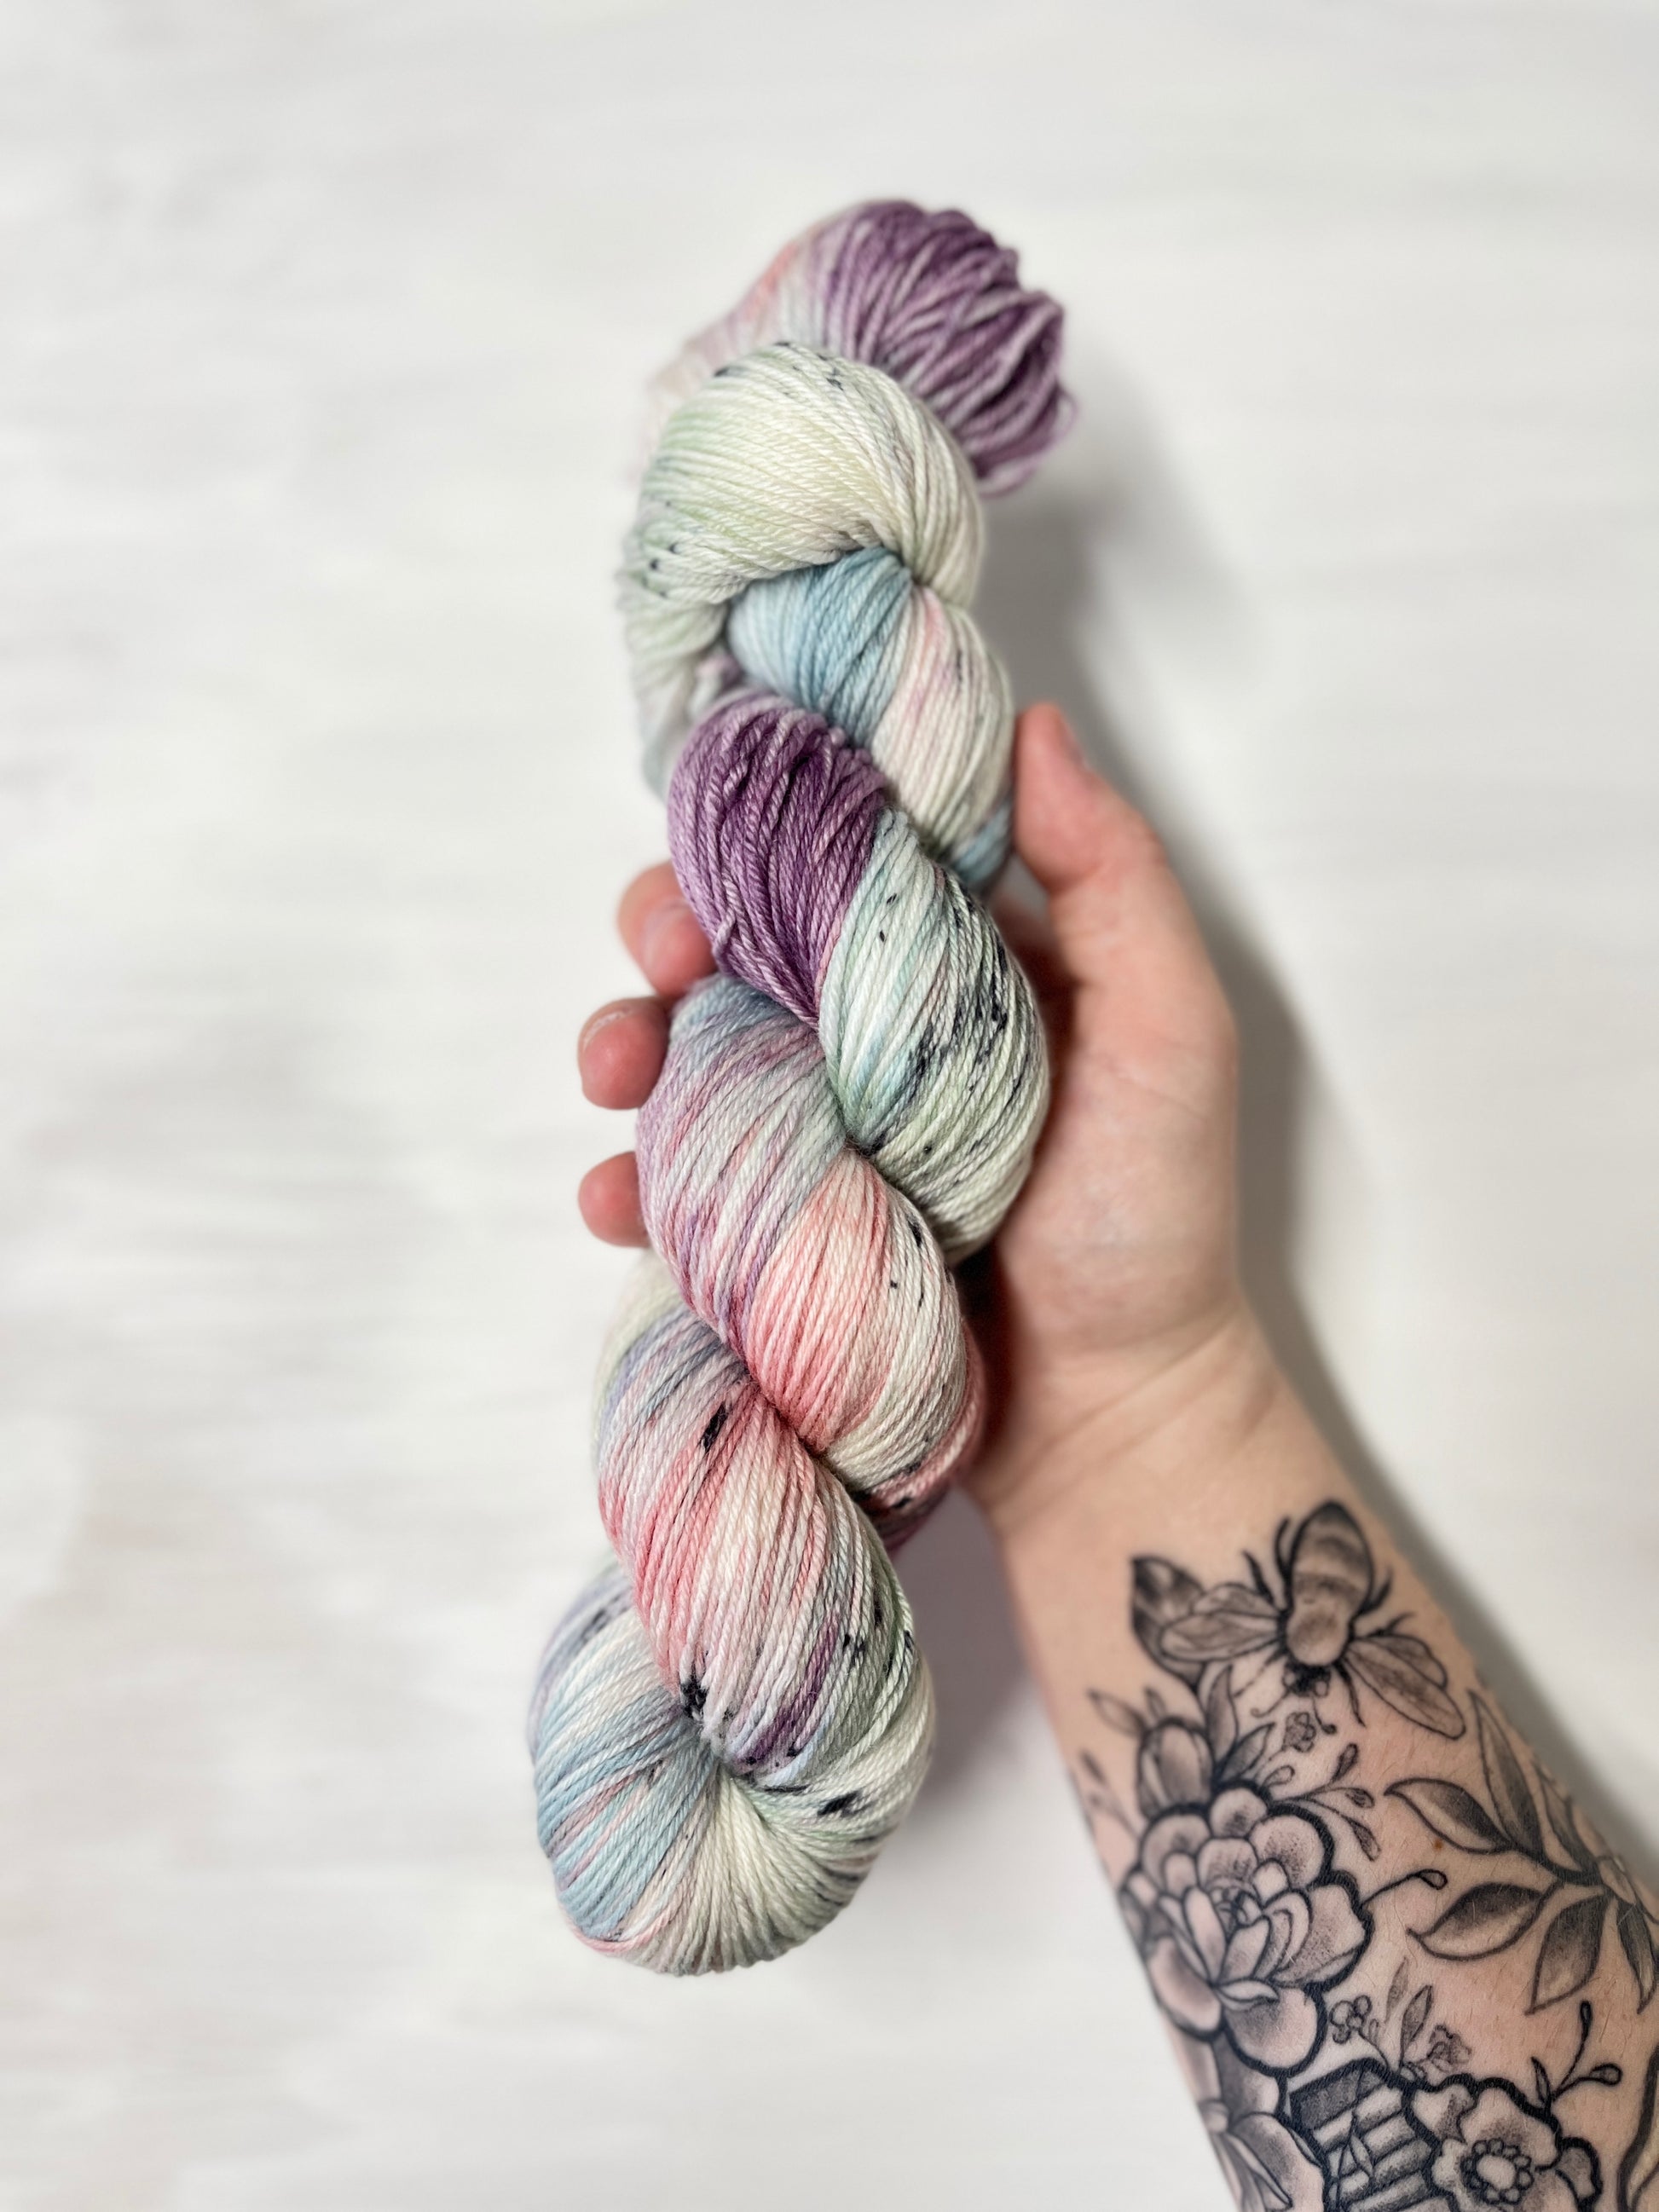 Inspired by Margot Vintage Carousel - Wool baseVintage Carousel is a classy colourway, with soft, dusty shades of pink, blue, purple and green, with speckles of black throughout.
We use premium quality yarn basesInspired by Margot Vintage Carousel - Wool base